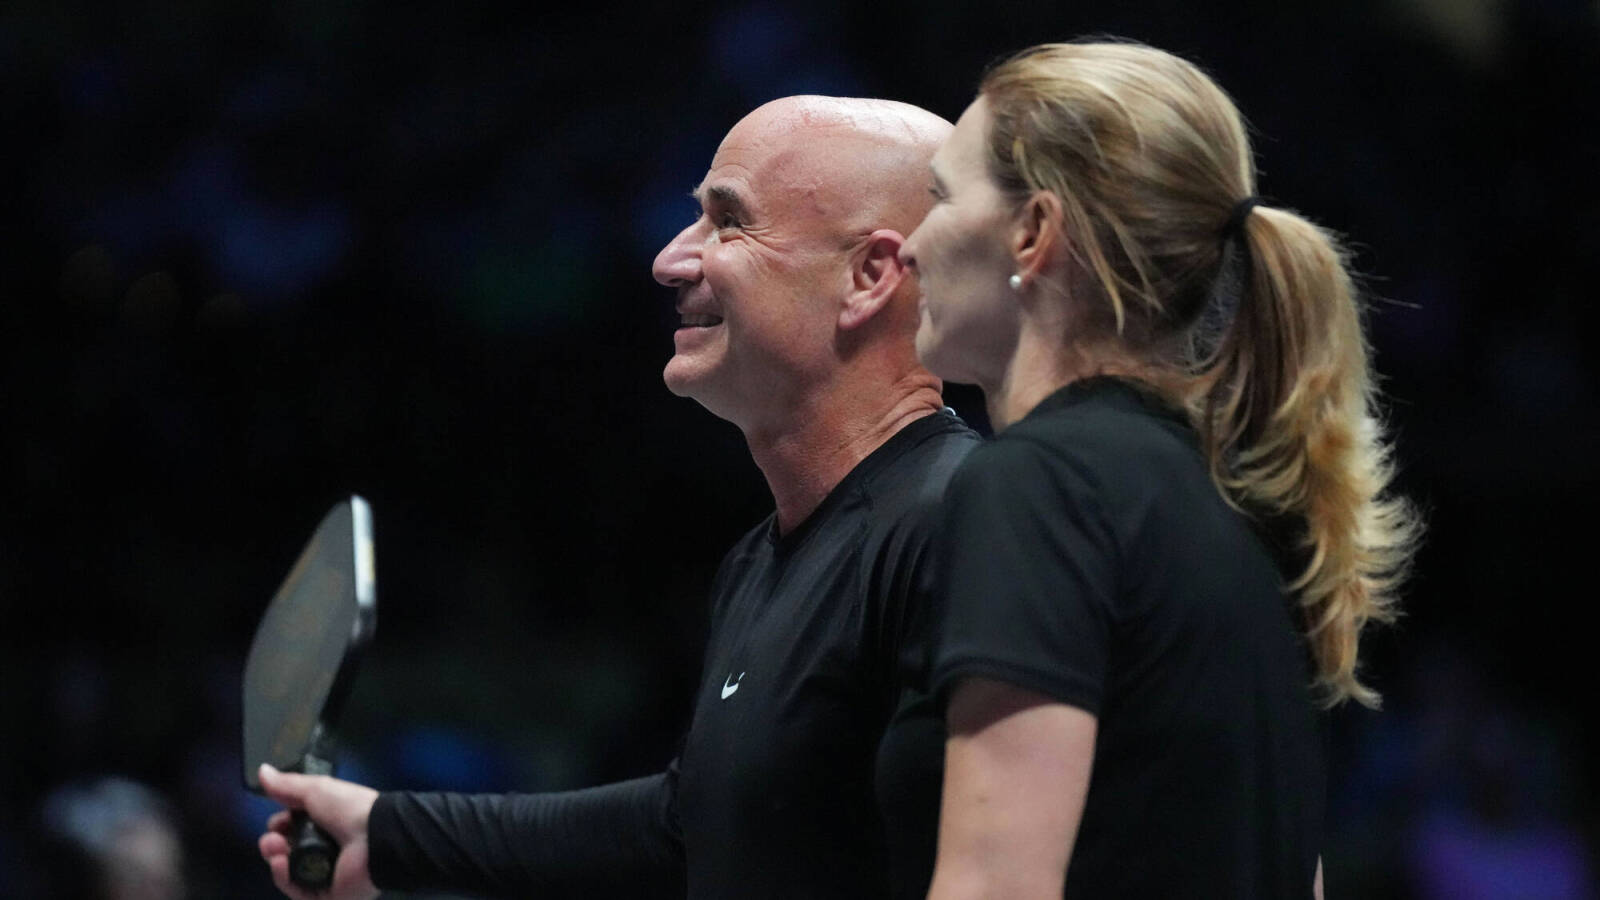 Andre Agassi couldn’t stop smiling as he poses with wife Stefi Graf after winning Pickleball Slam 2